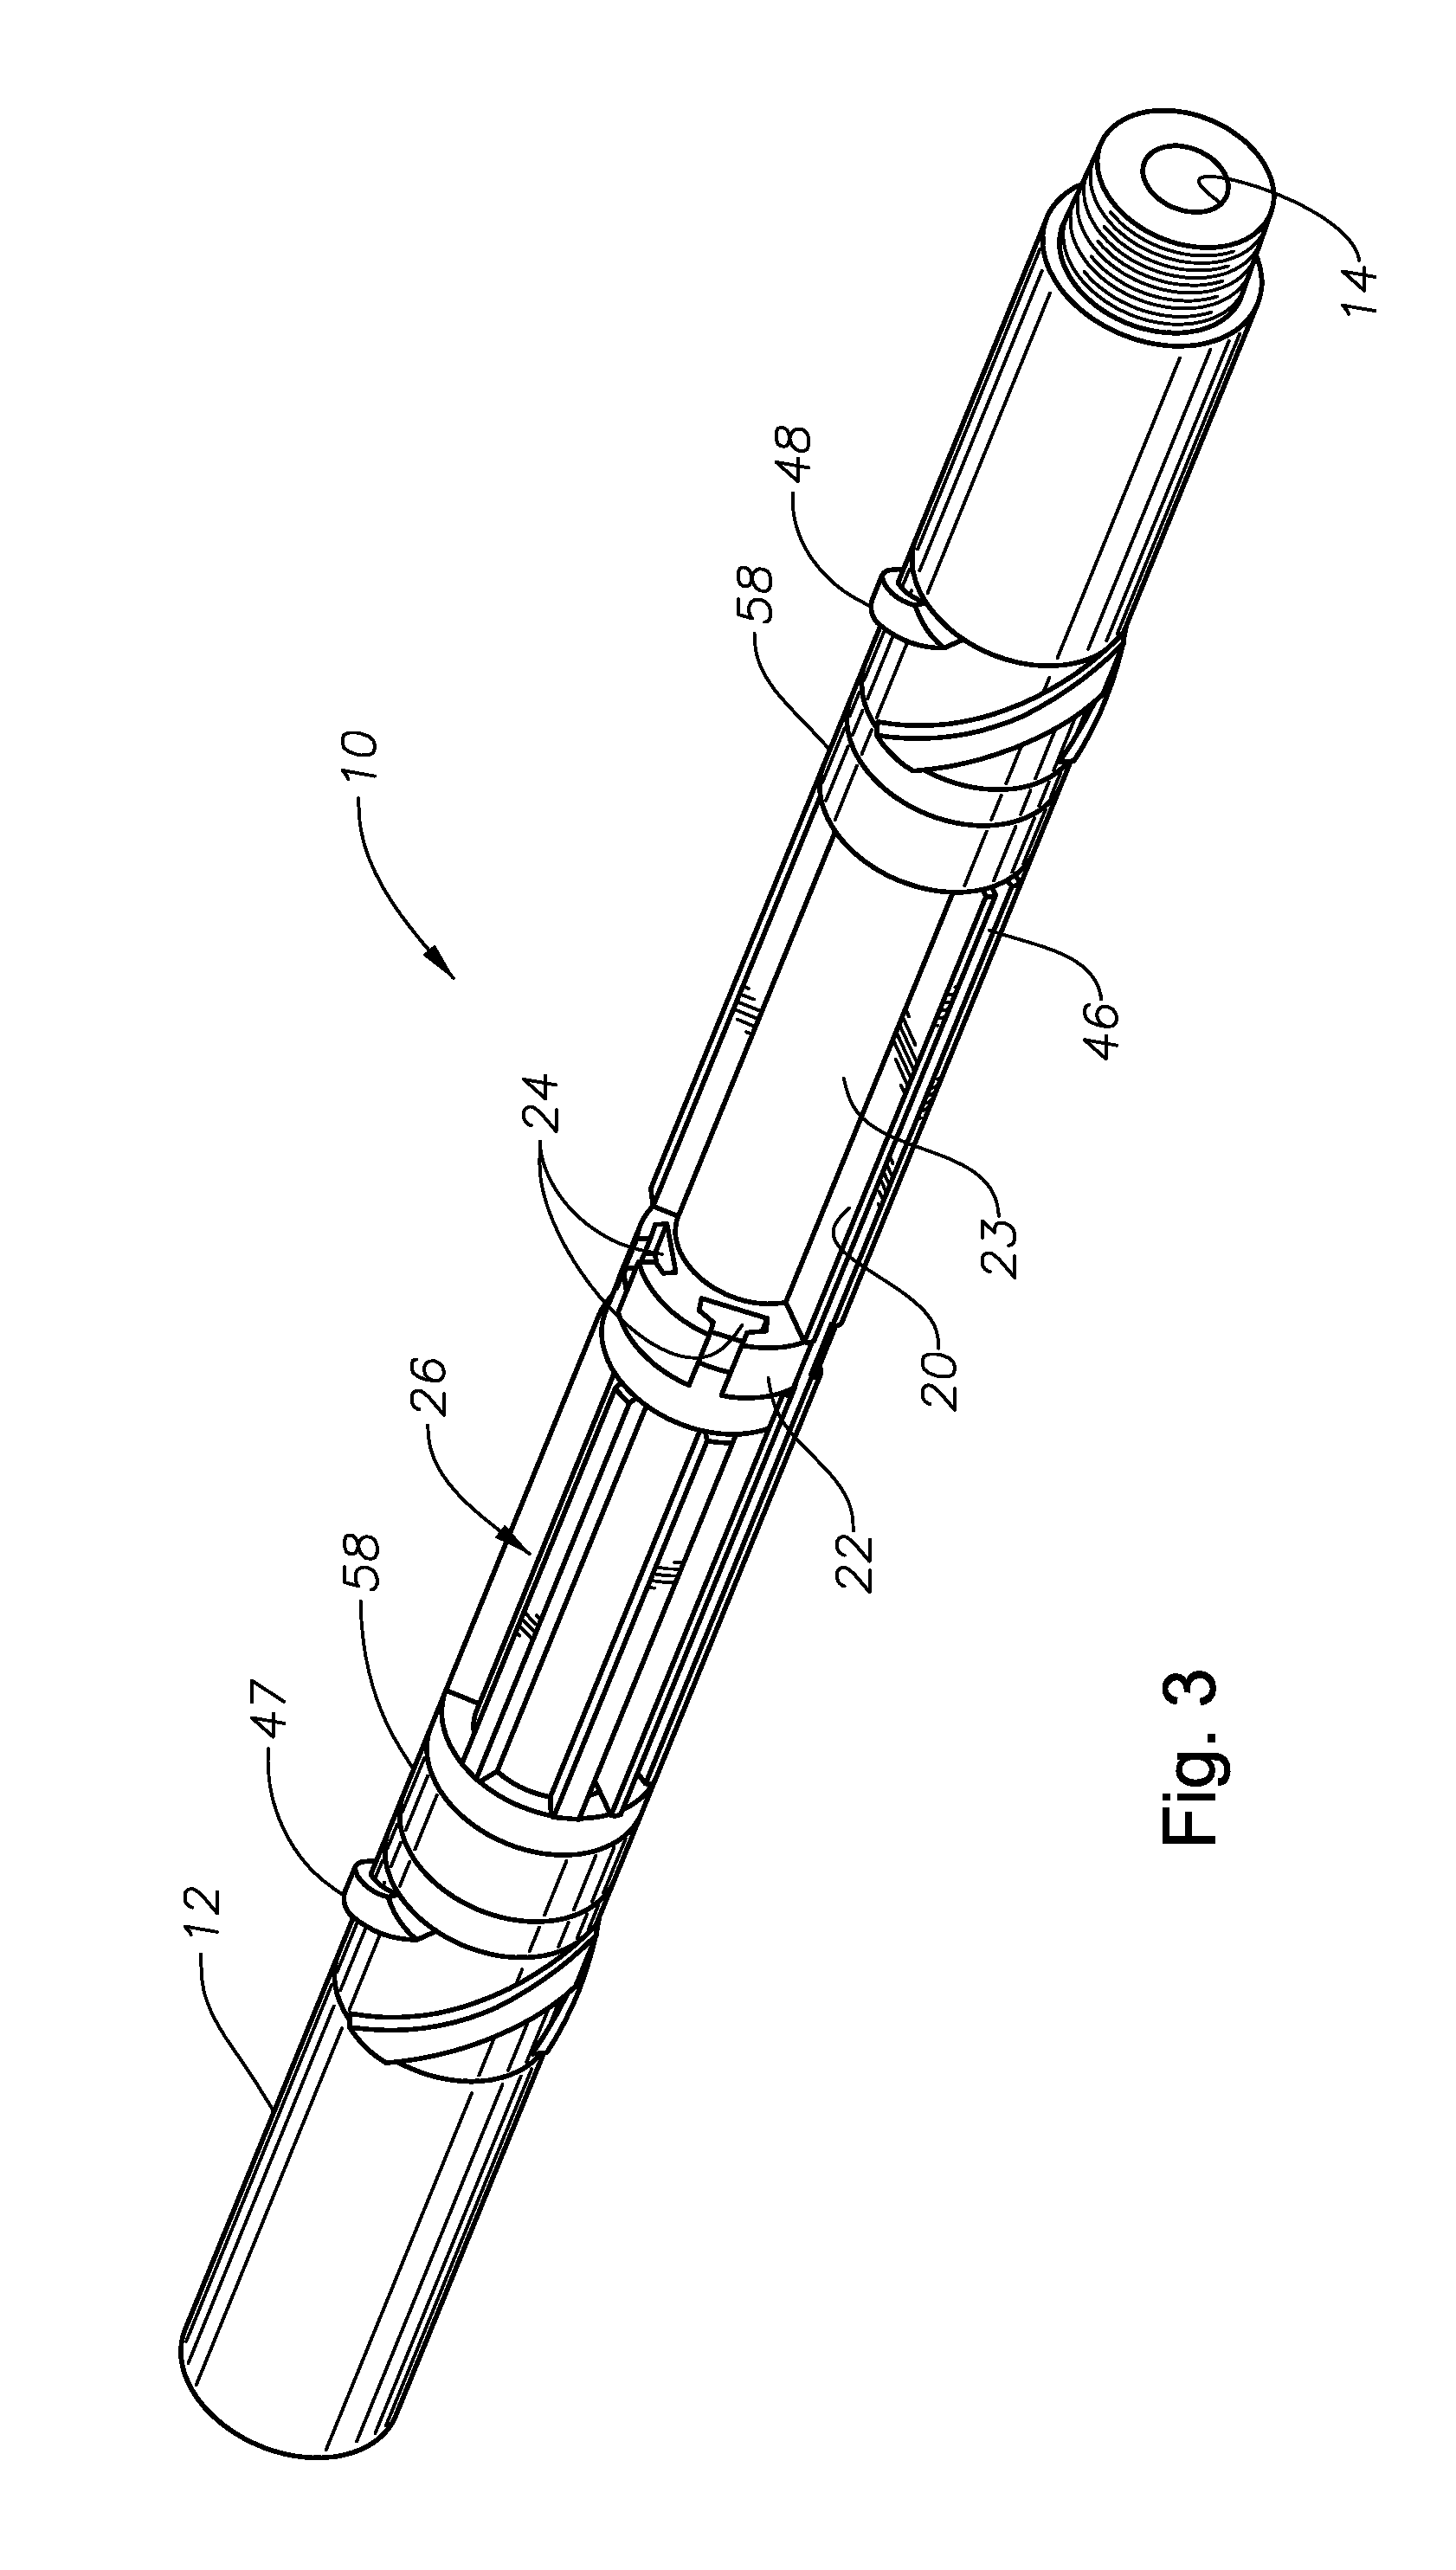 Retaining and isolating mechanisms for magnets in a magnetic cleaning tool